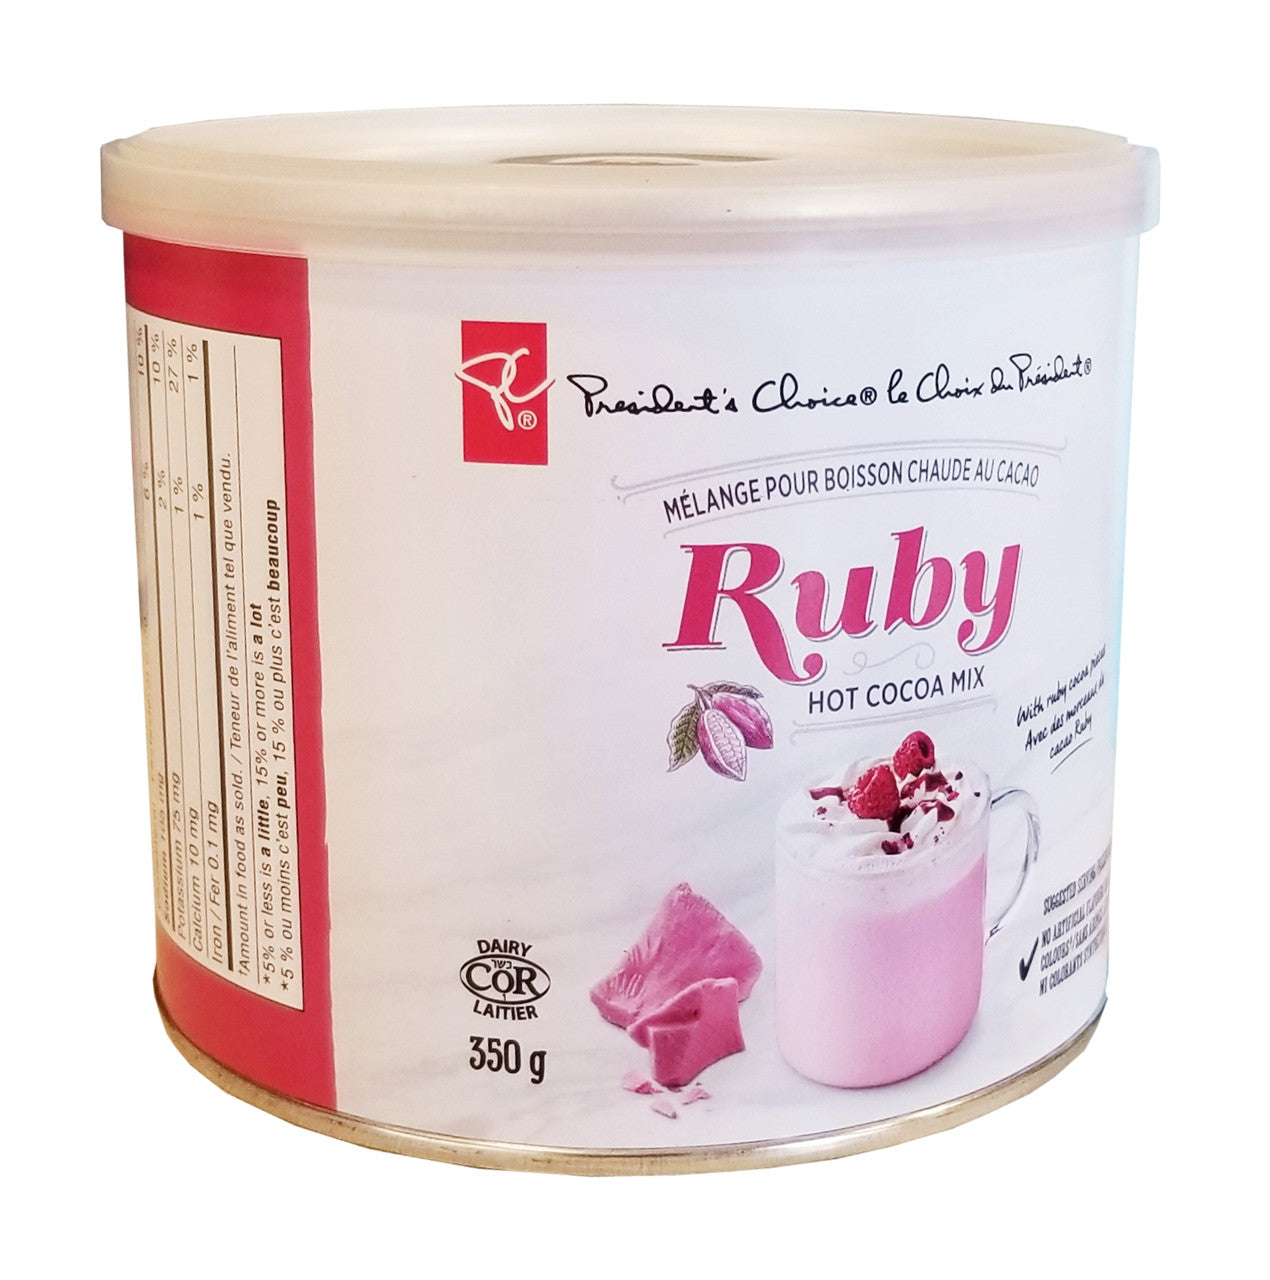 President's Choice Ruby Hot Cocoa Mix, 350g/12 oz., Tin {Imported from Canada}